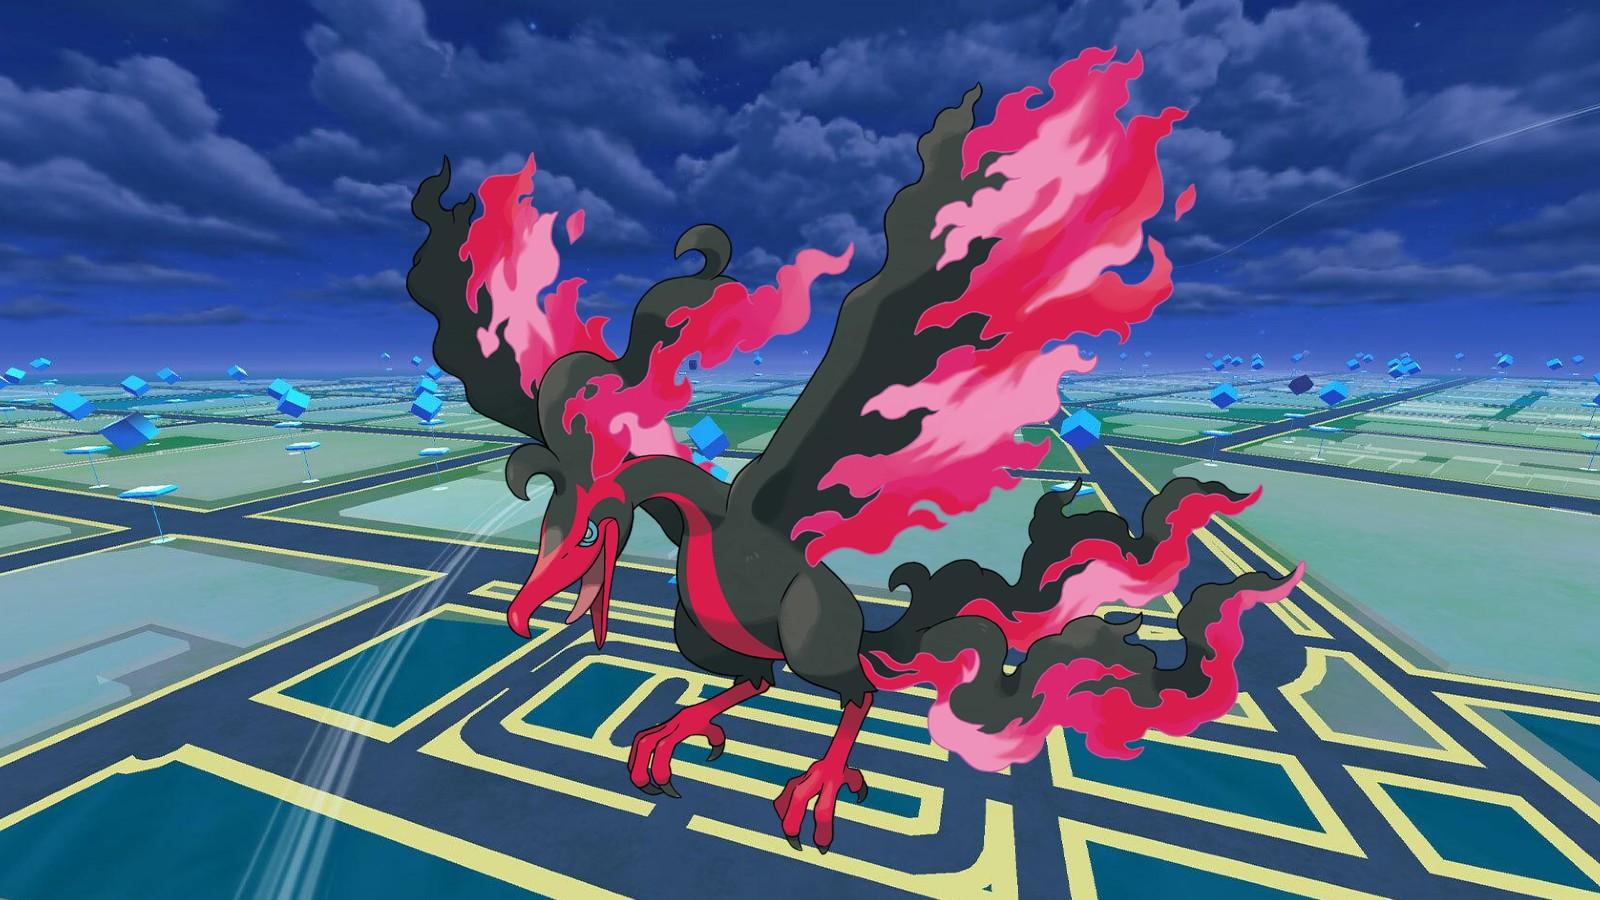 Pokemon Go player furious as “glitched” Moltres appears and it's